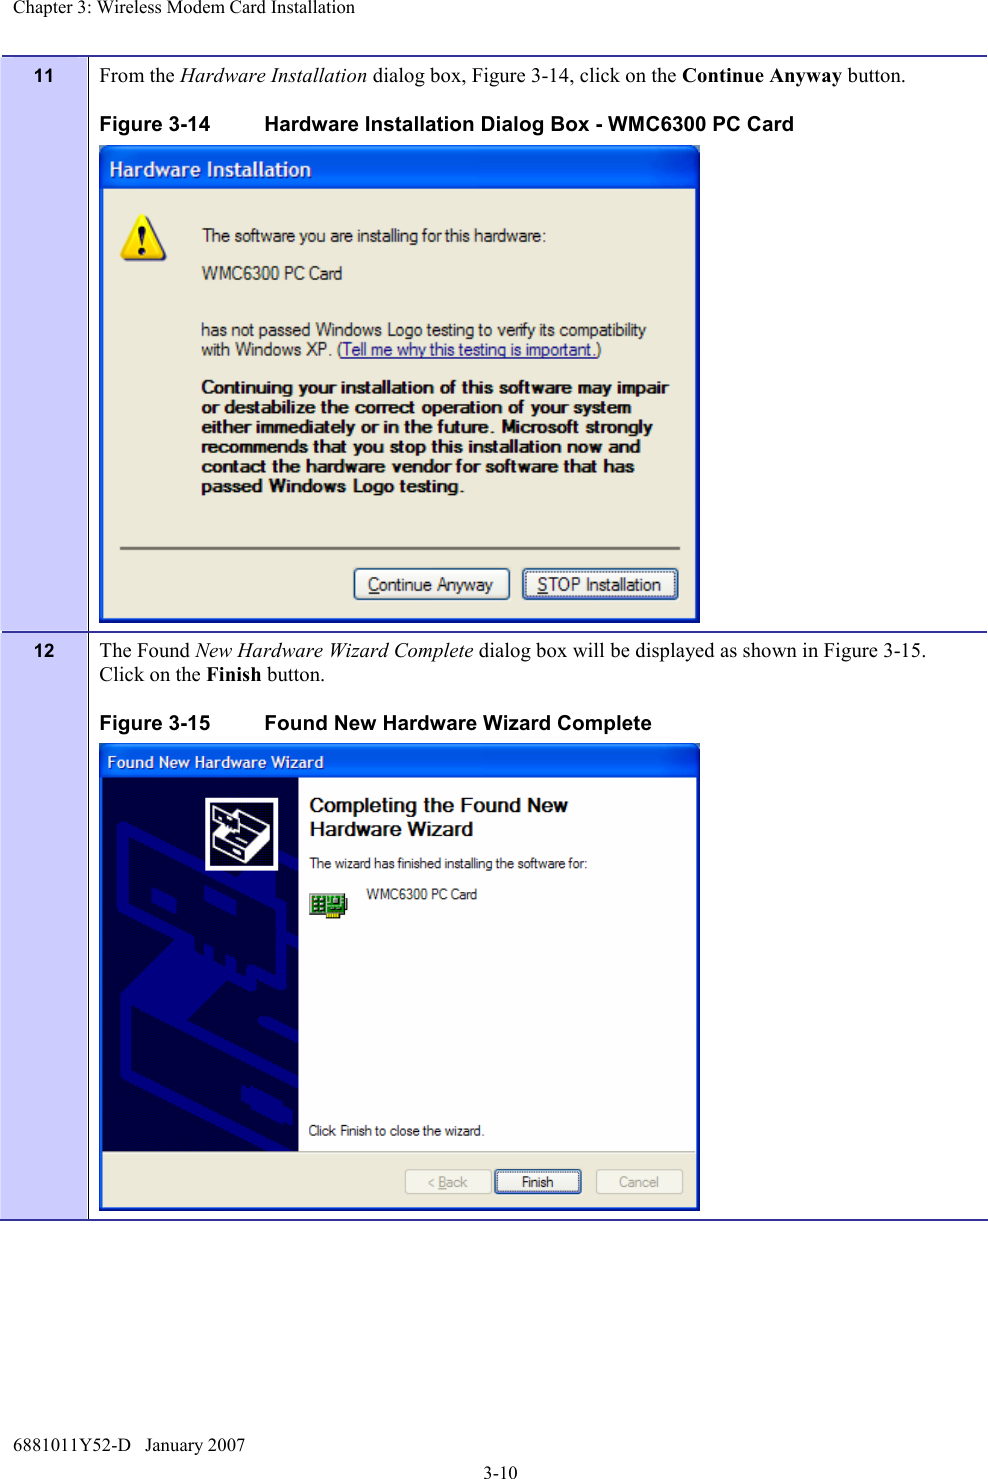 Chapter 3: Wireless Modem Card Installation 6881011Y52-D   January 2007 3-10 11  From the Hardware Installation dialog box, Figure 3-14, click on the Continue Anyway button. Figure 3-14  Hardware Installation Dialog Box - WMC6300 PC Card  12  The Found New Hardware Wizard Complete dialog box will be displayed as shown in Figure 3-15.  Click on the Finish button. Figure 3-15  Found New Hardware Wizard Complete  